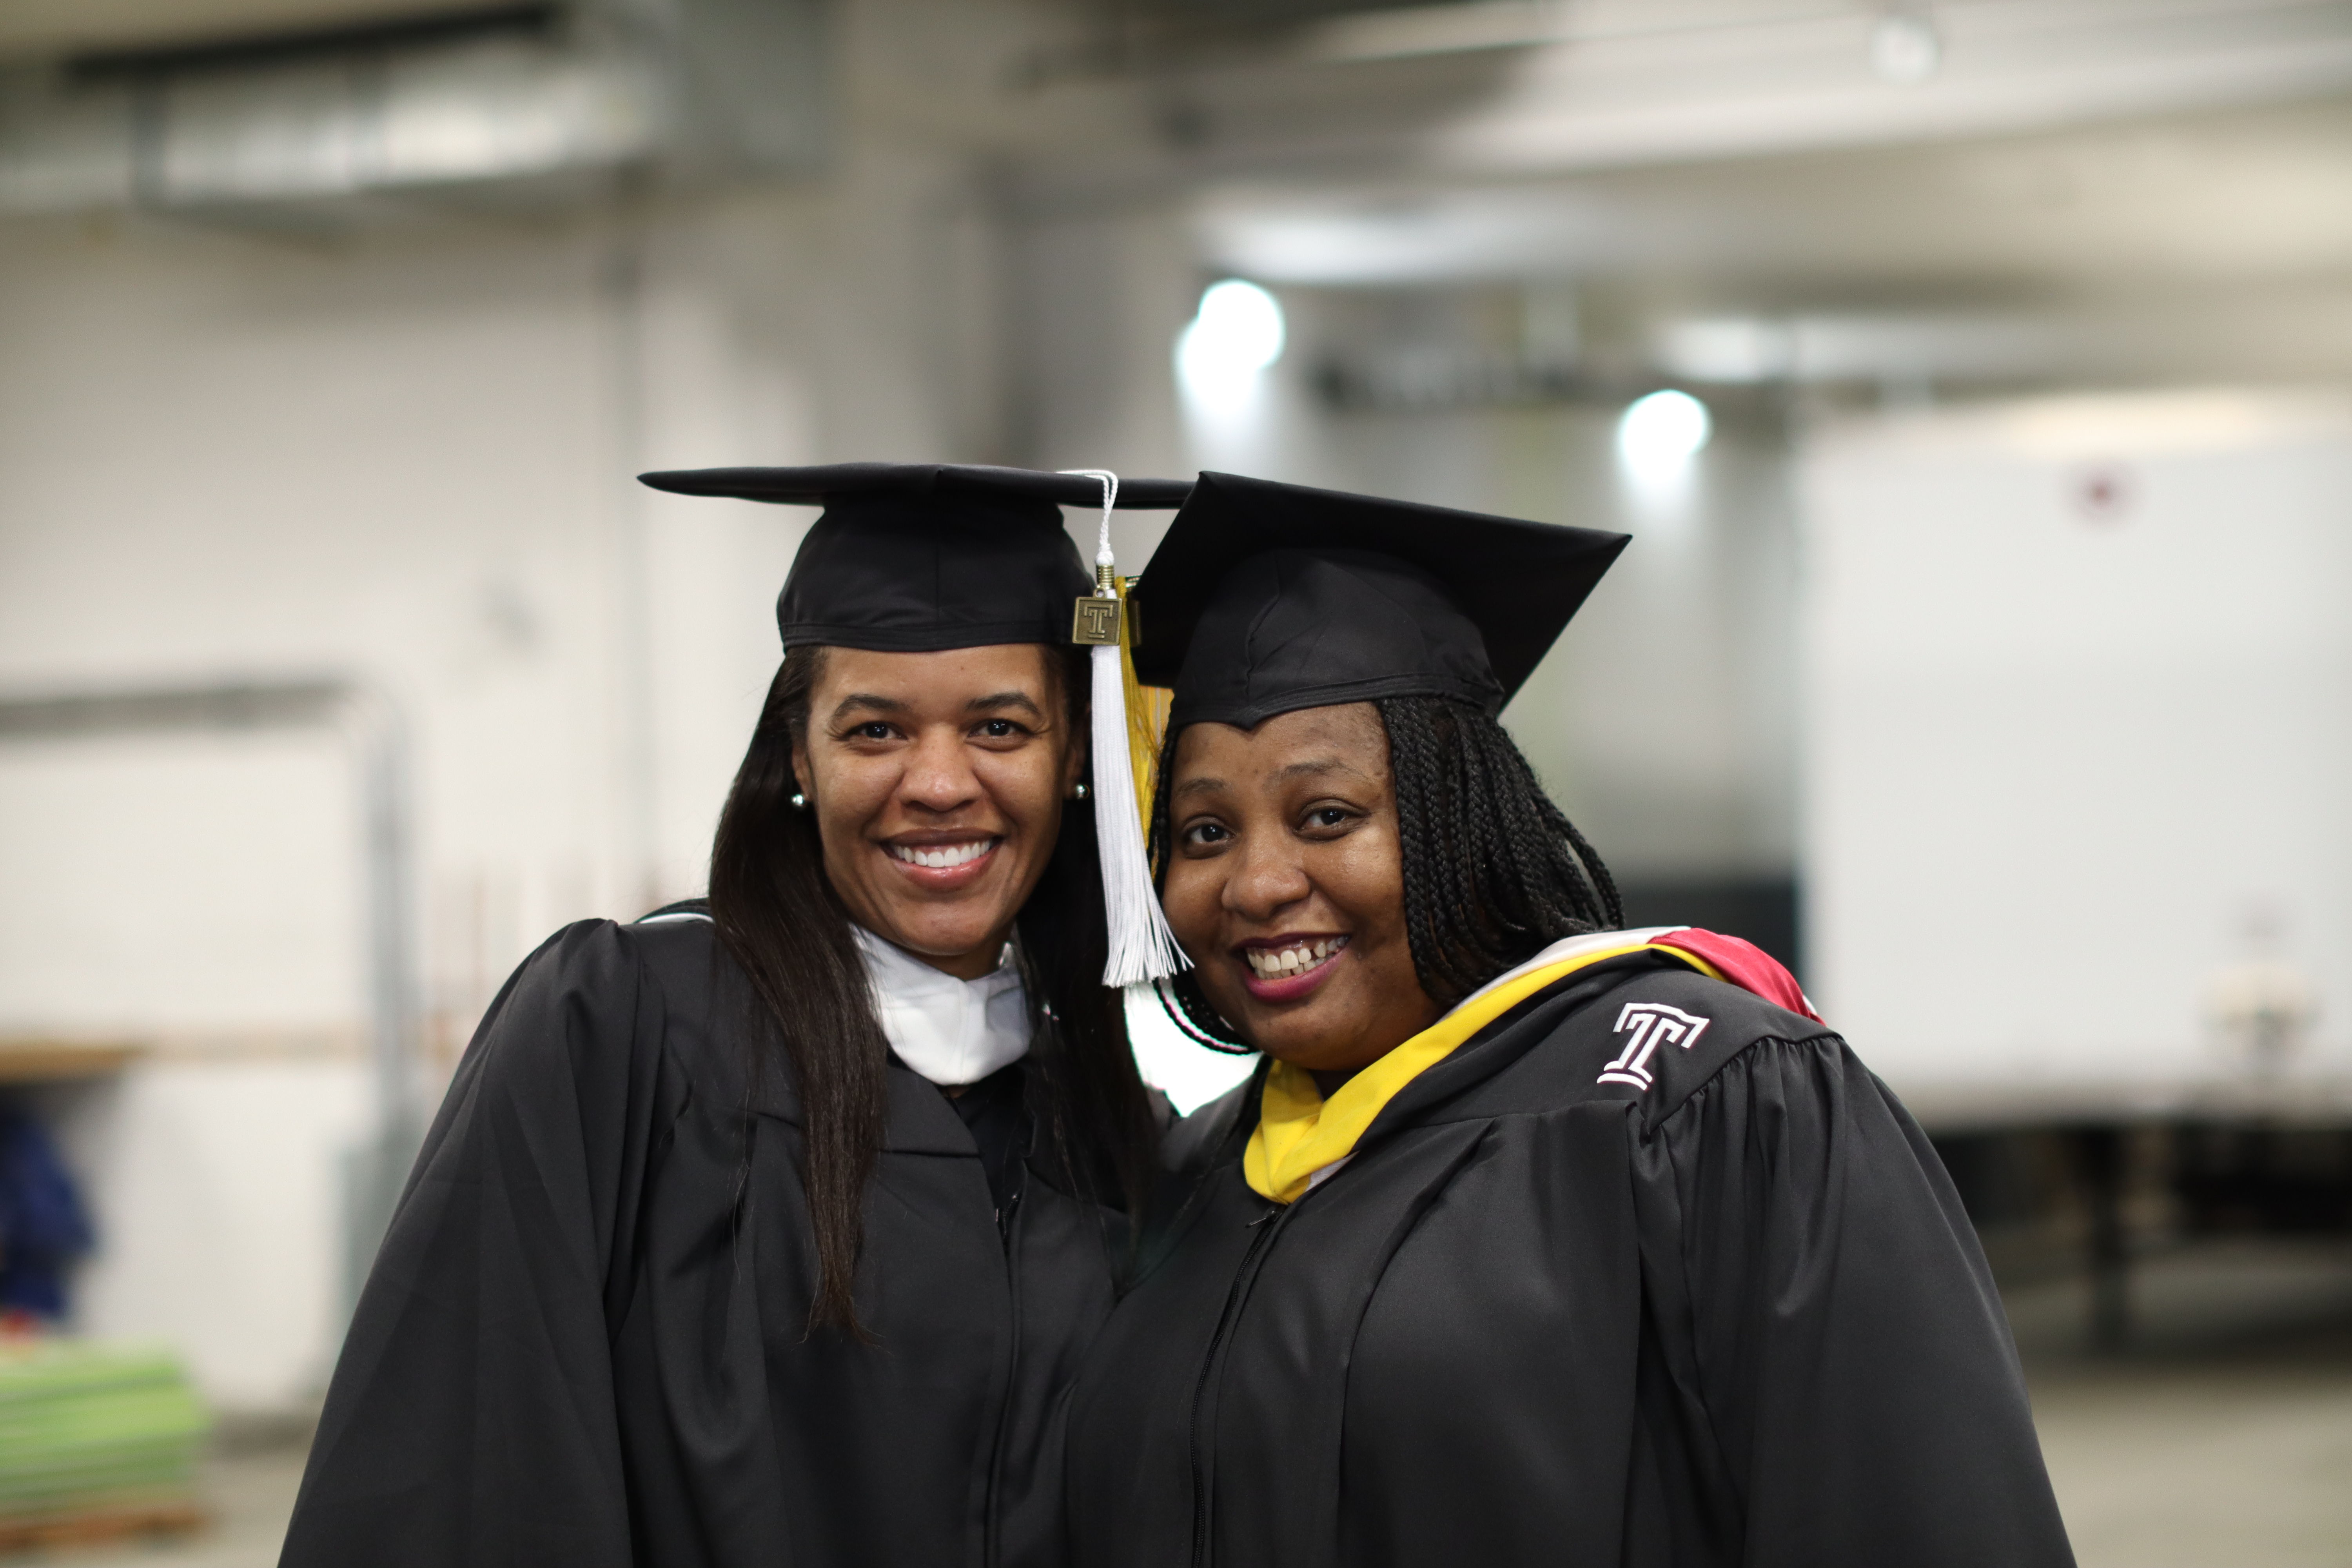 Two students smiling together in their academic regalia before graduation